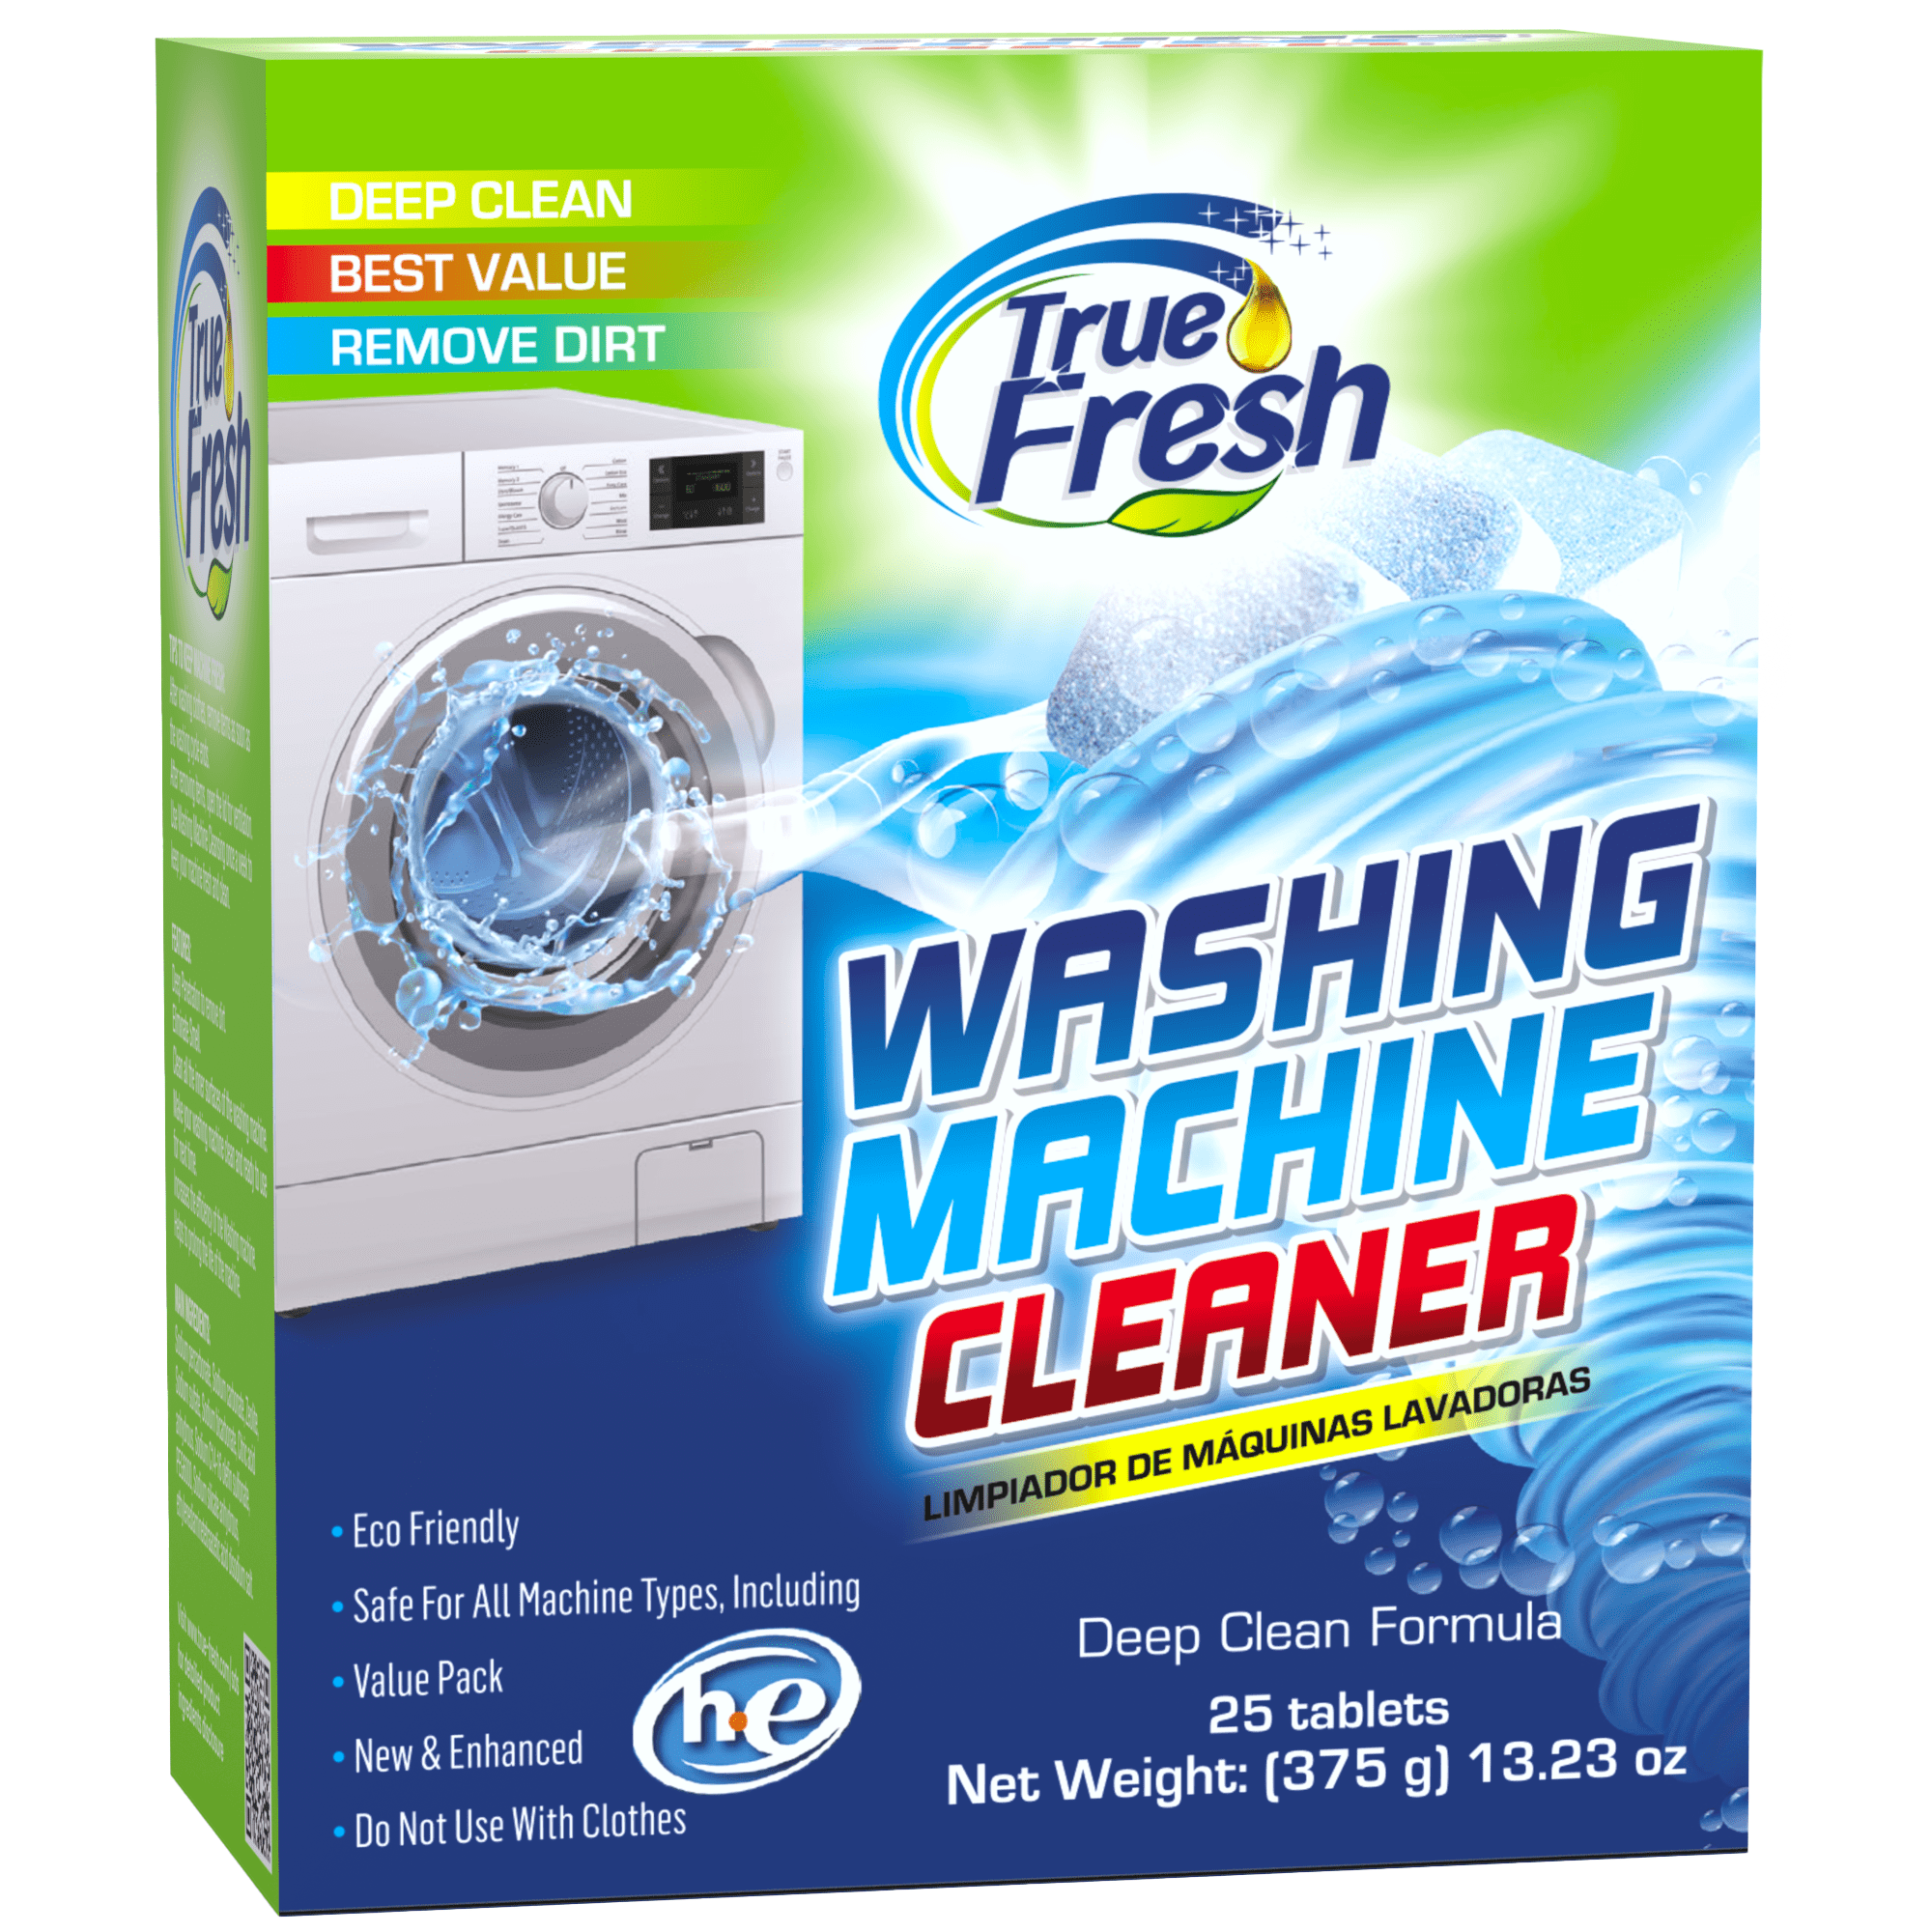 Damallren Washing Machine Cleaner, 24 Tablets Washer Machine Cleaner,  Washing Machine Deep Cleaning Tablets for All Washers Machines Including HE  Front Loader & Top Load Washer blue